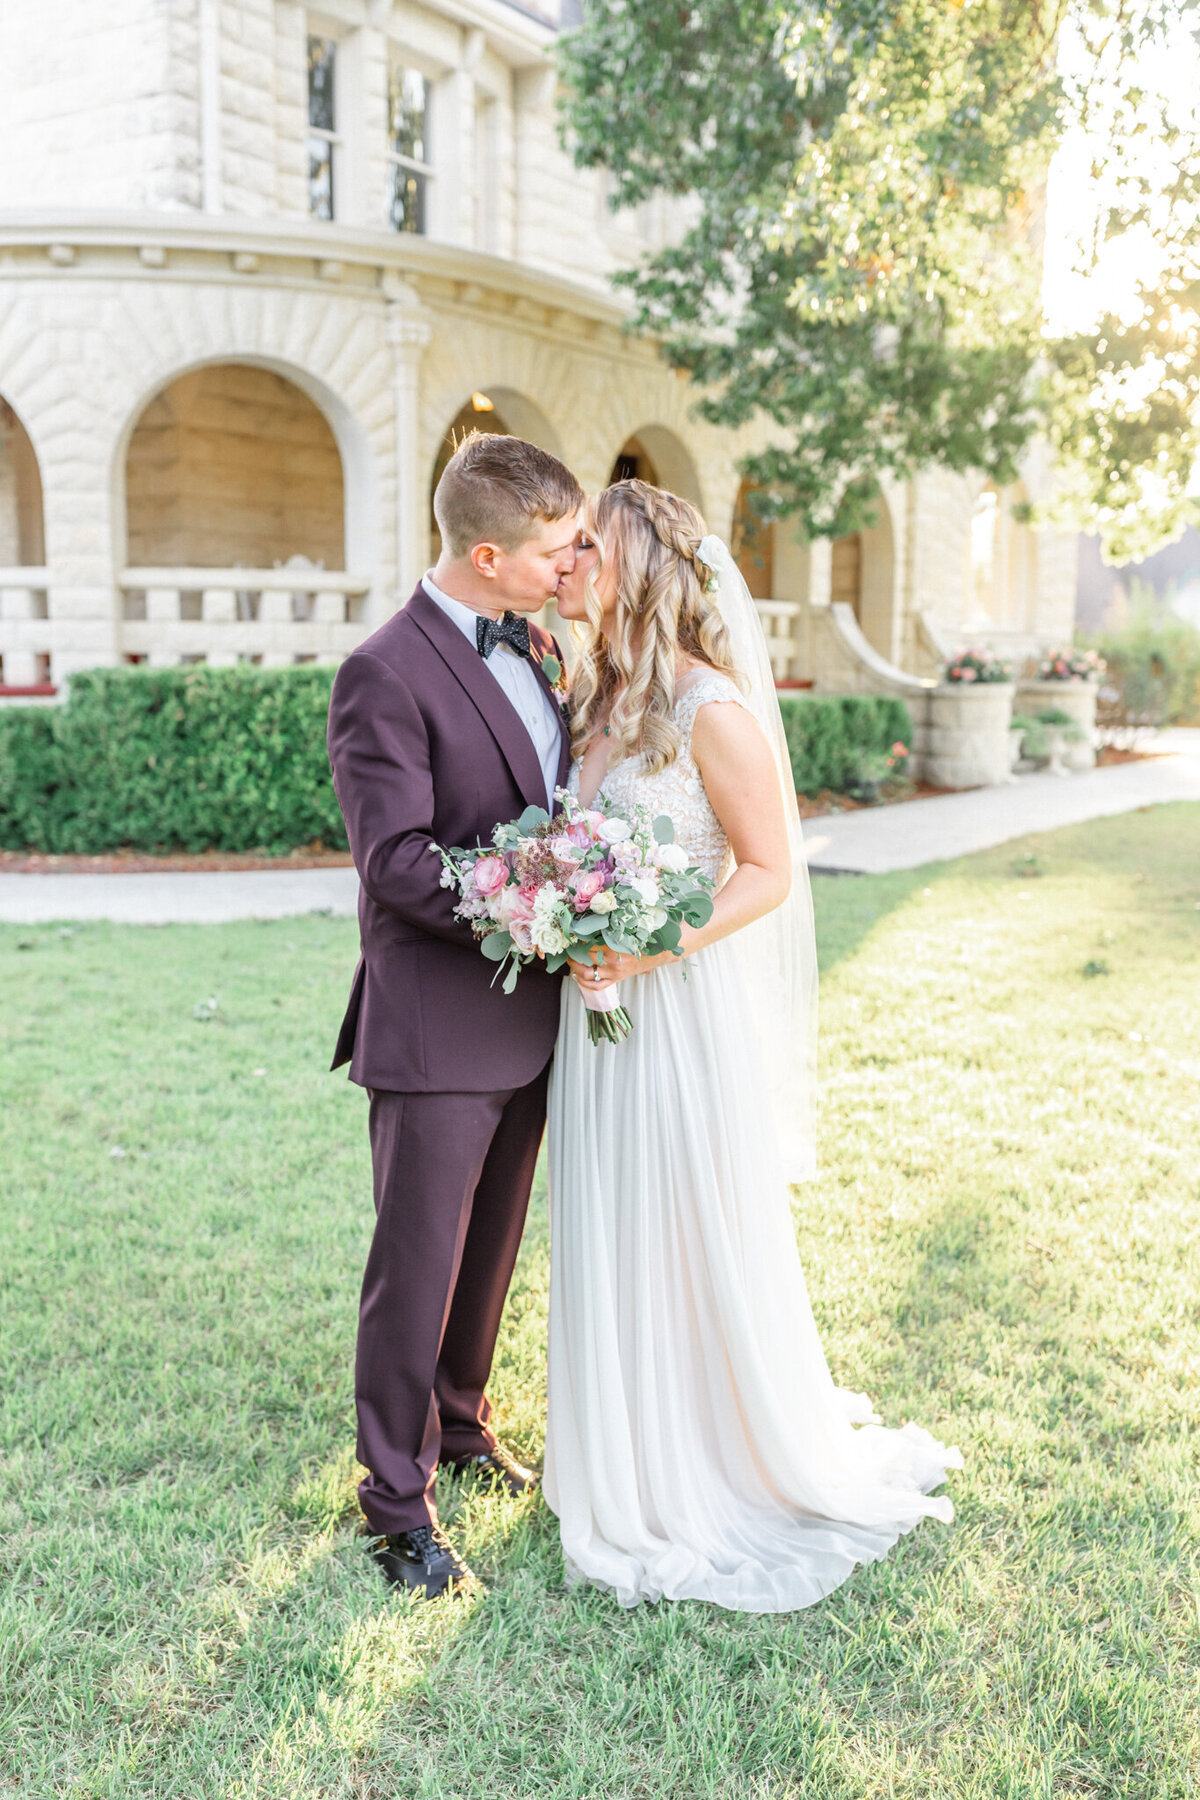 Jessica Chole Photography San Antonio Texas California Wedding Portrait Engagement Maternity Family Lifestyle Photographer Souther Cali TX CA Light Airy Bright Colorful Photography21